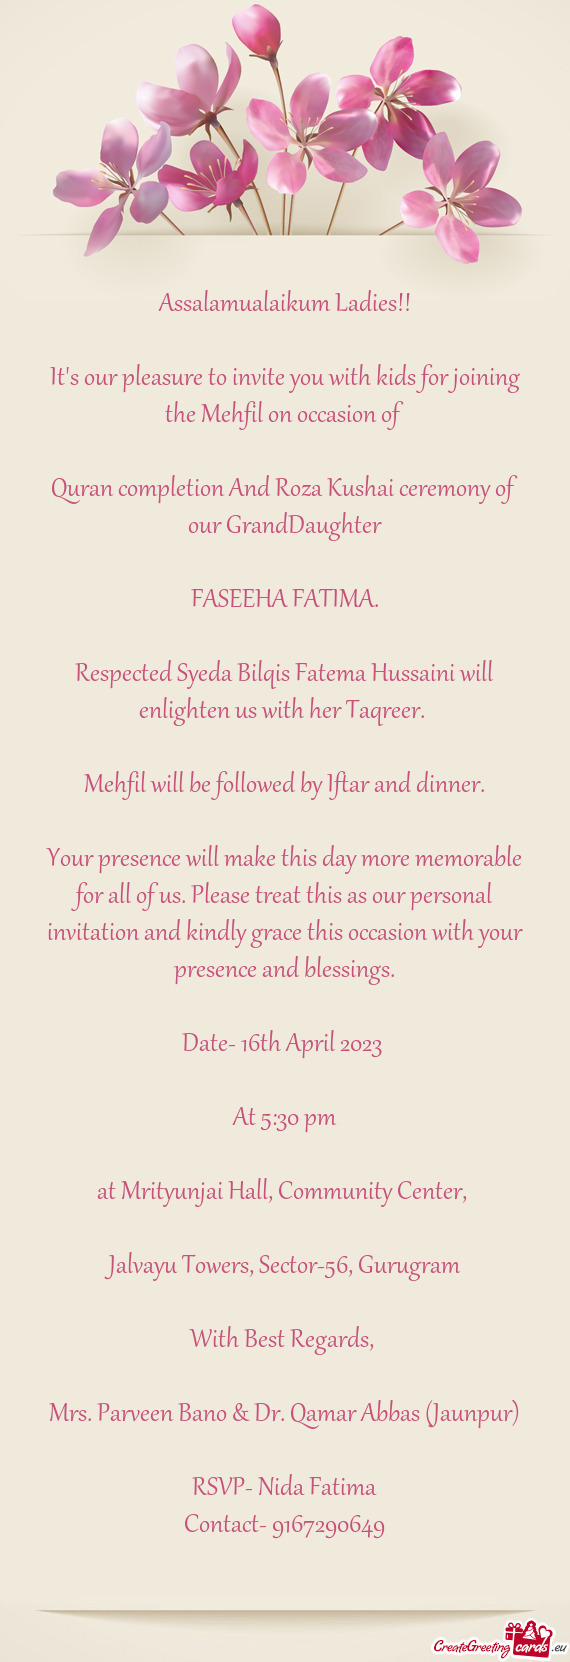 Respected Syeda Bilqis Fatema Hussaini will enlighten us with her Taqreer